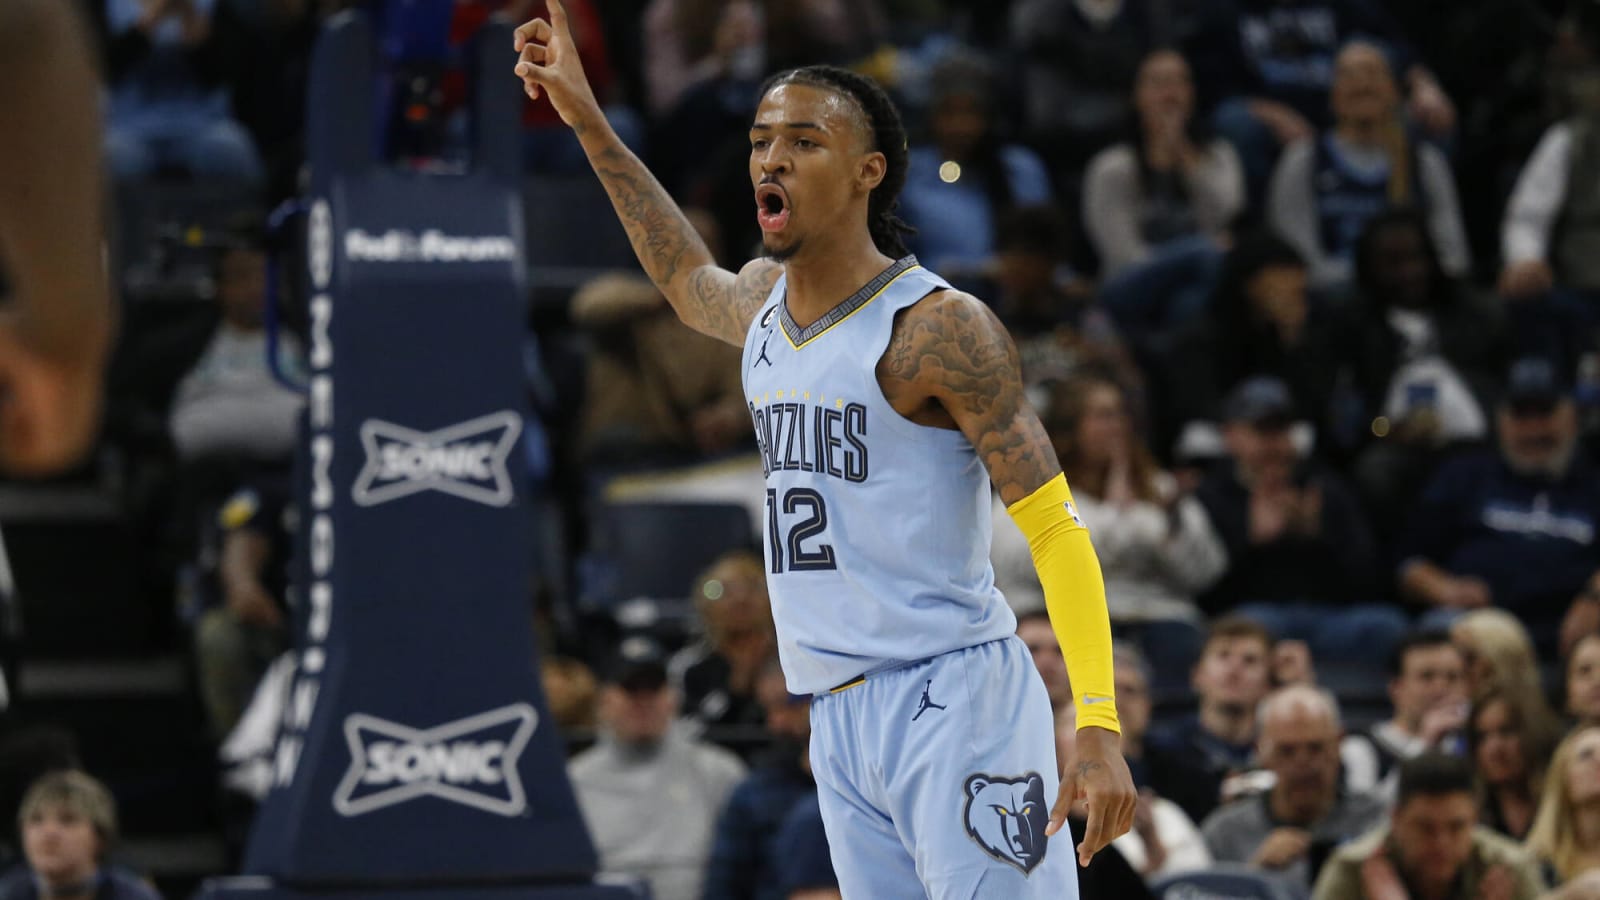 Ja Morant Now Has The Most Triple-Doubles In Grizzlies History After His Sixth Against Thunder